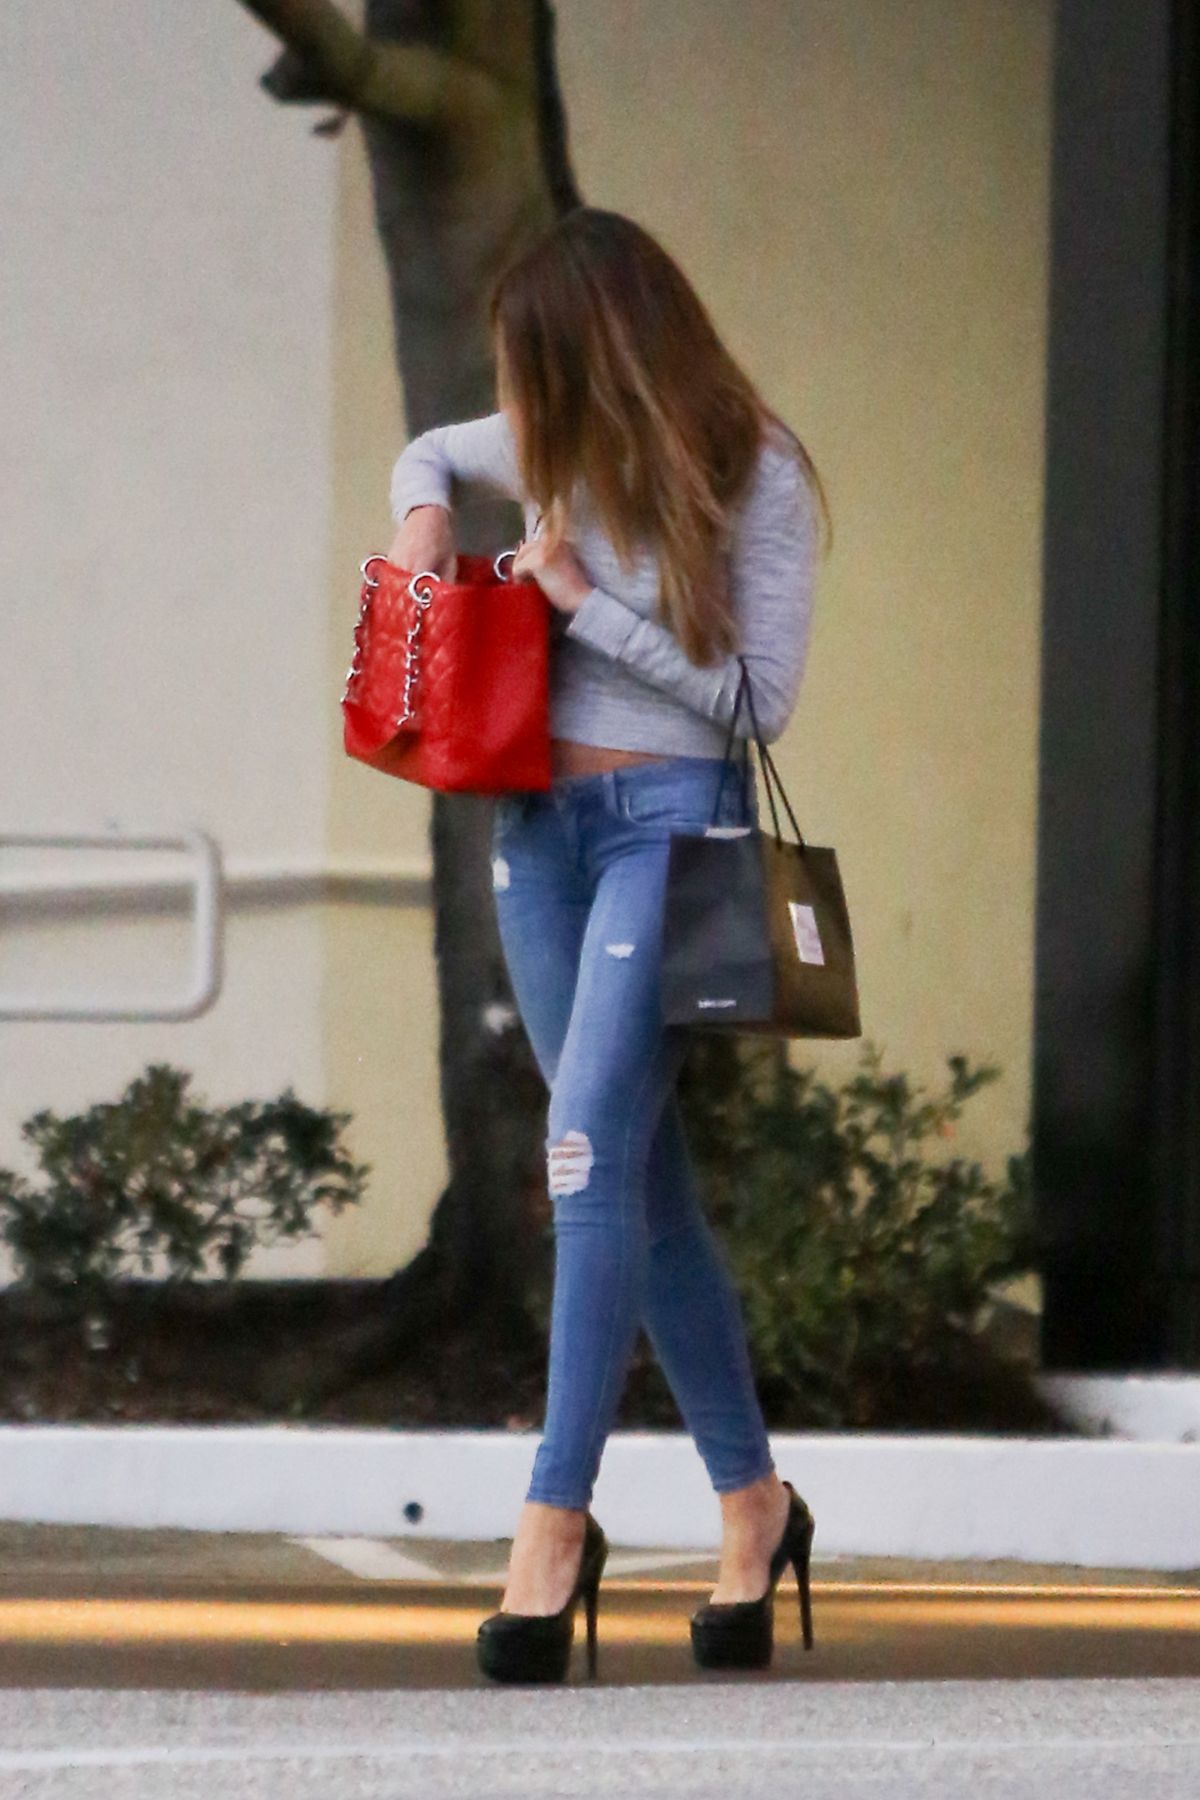 sofia-vergara-in-jeans-out-and-about-in-beverly-hills-01-14-2016_2